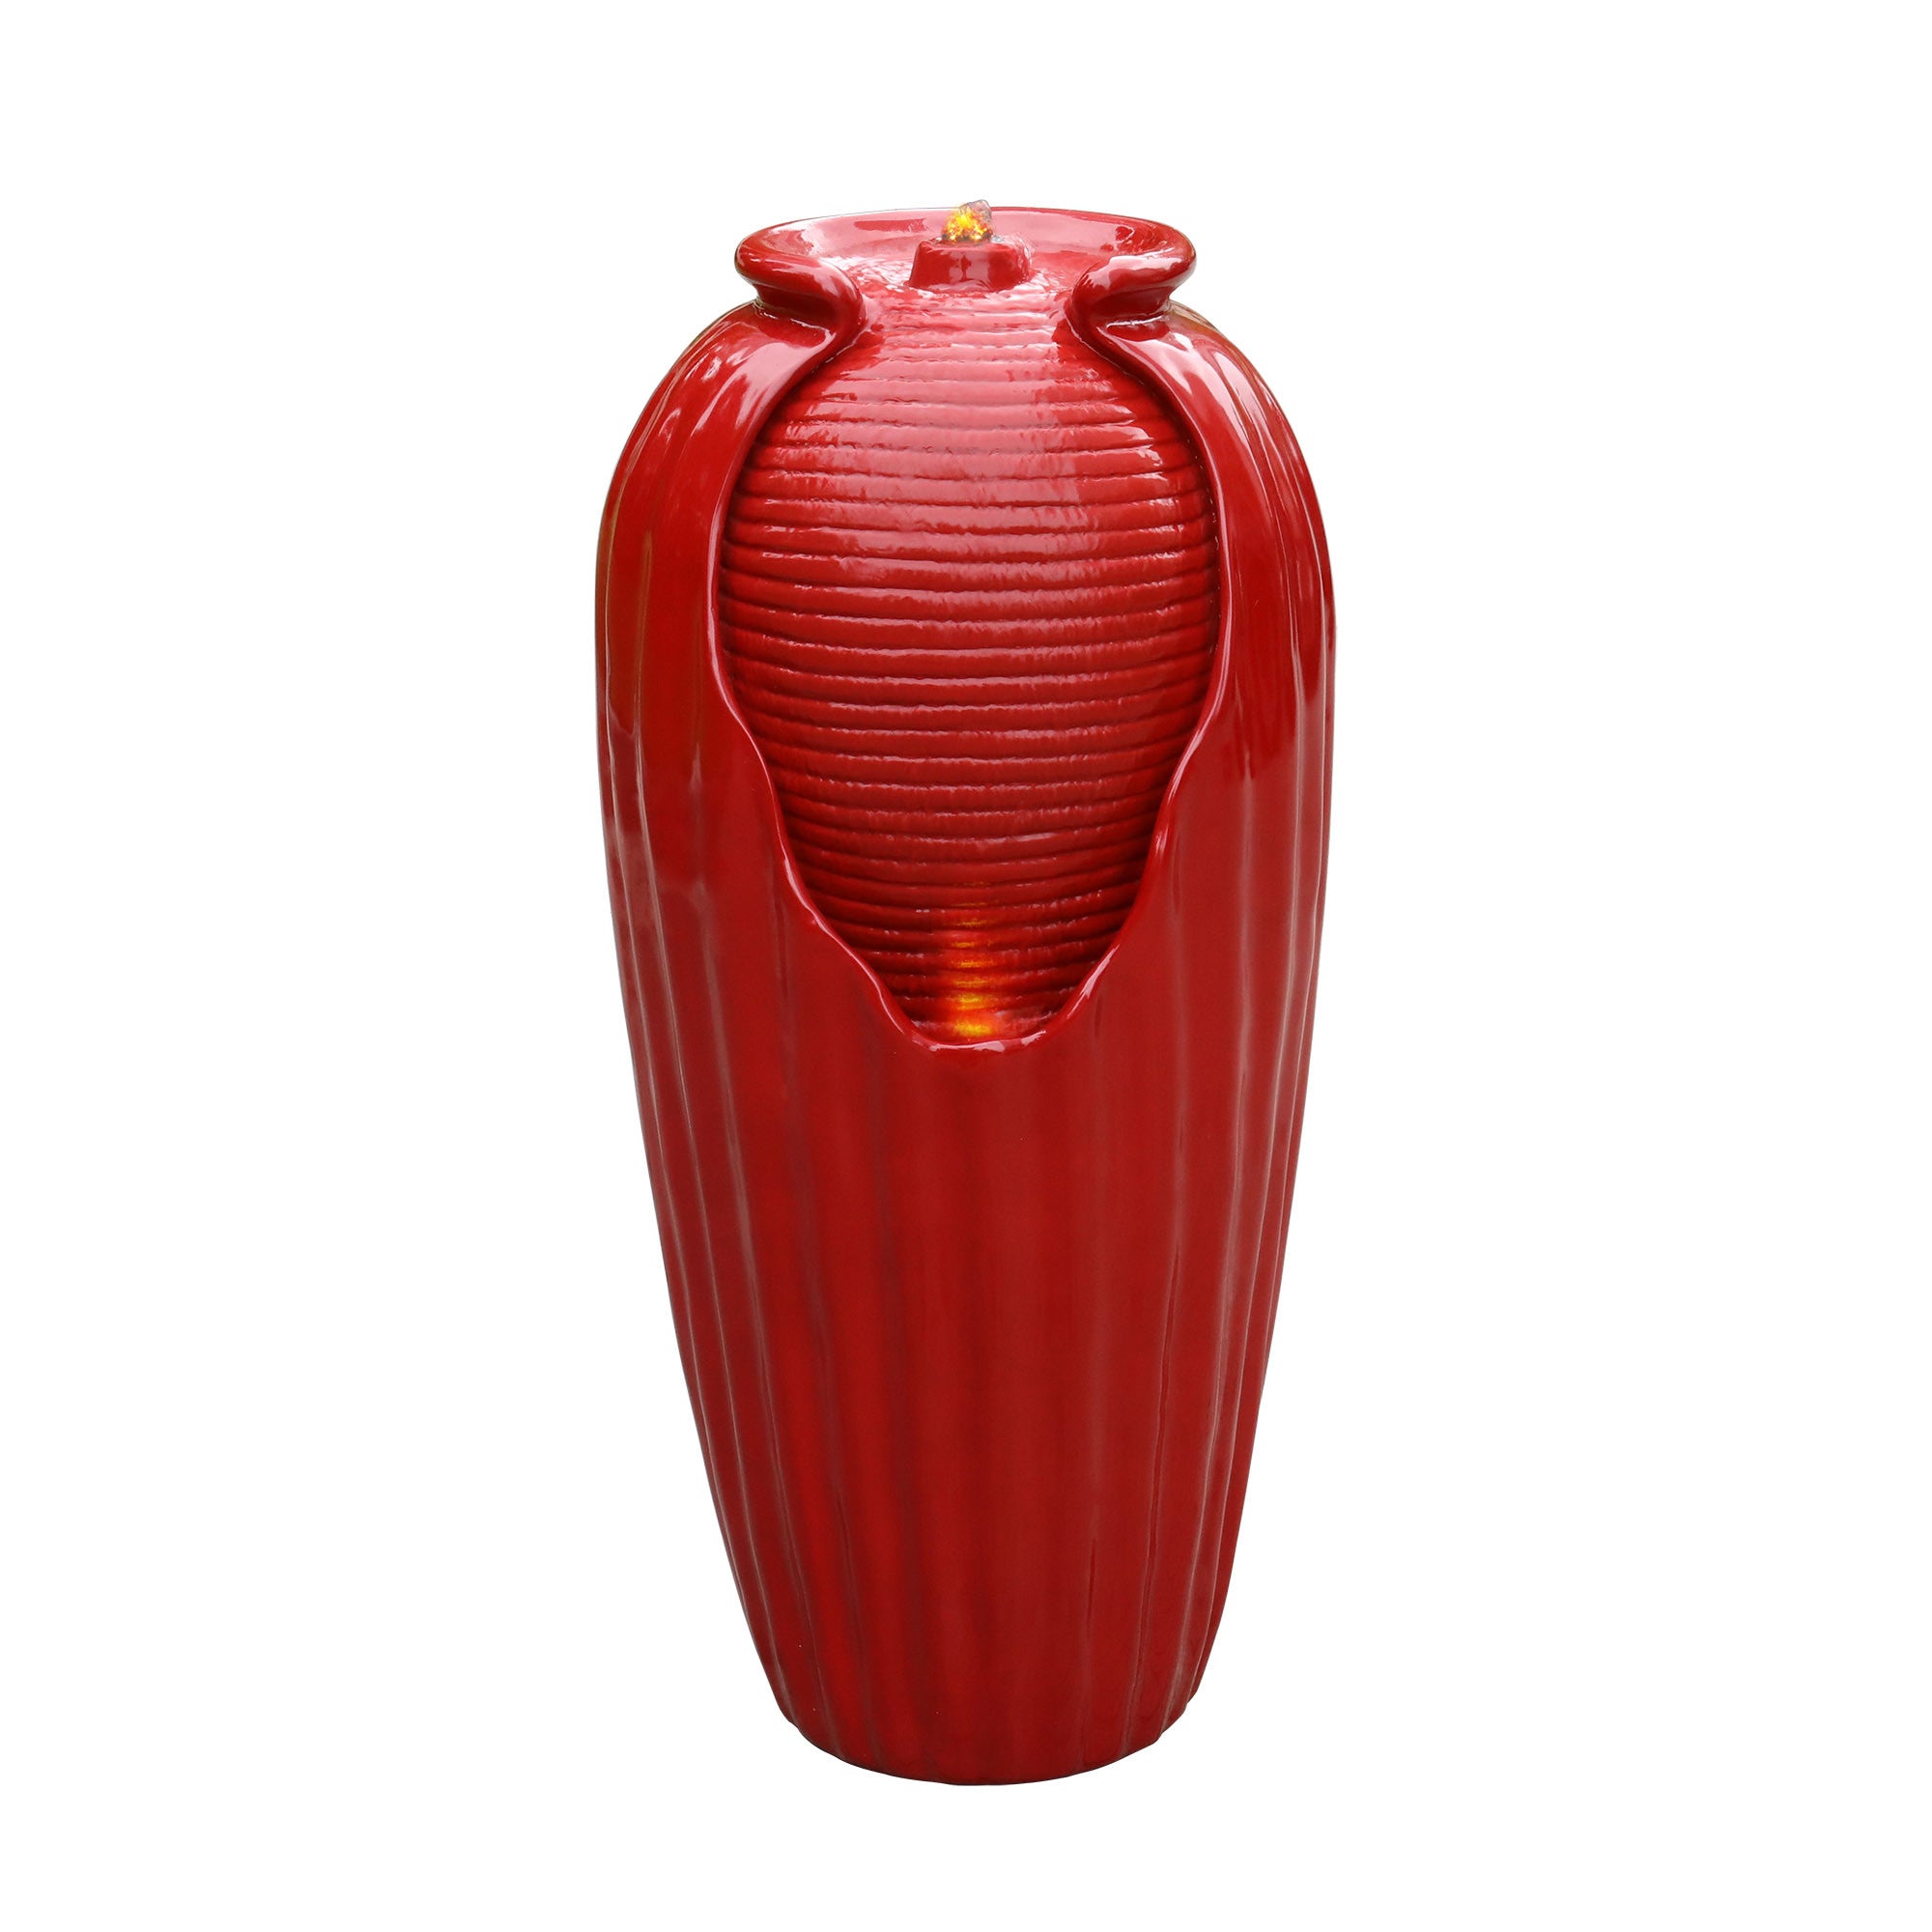 Teamson Home Indoor/Outdoor Contemporary Glazed Contoured Vase Water Fountain with LED Lights, Red